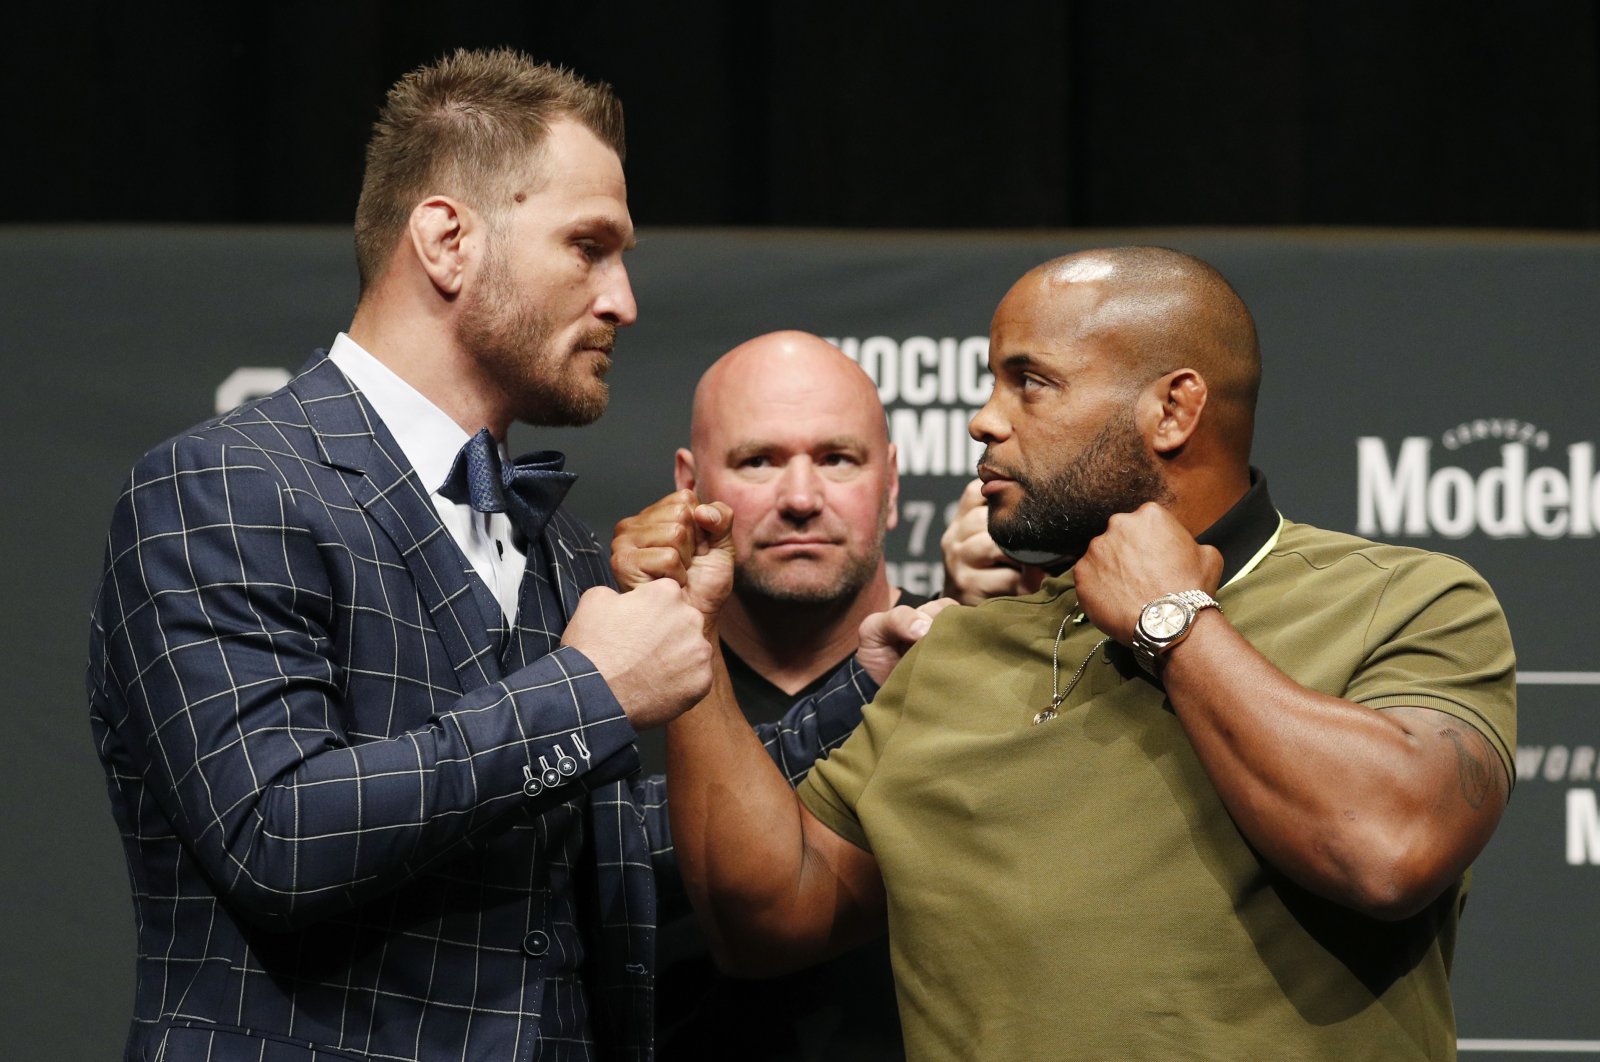 Stipe Miocic (L) and Daniel Cormier pose during a news conference, in Las Vegas, U.S., July 5, 2018. (AP PHOTO)